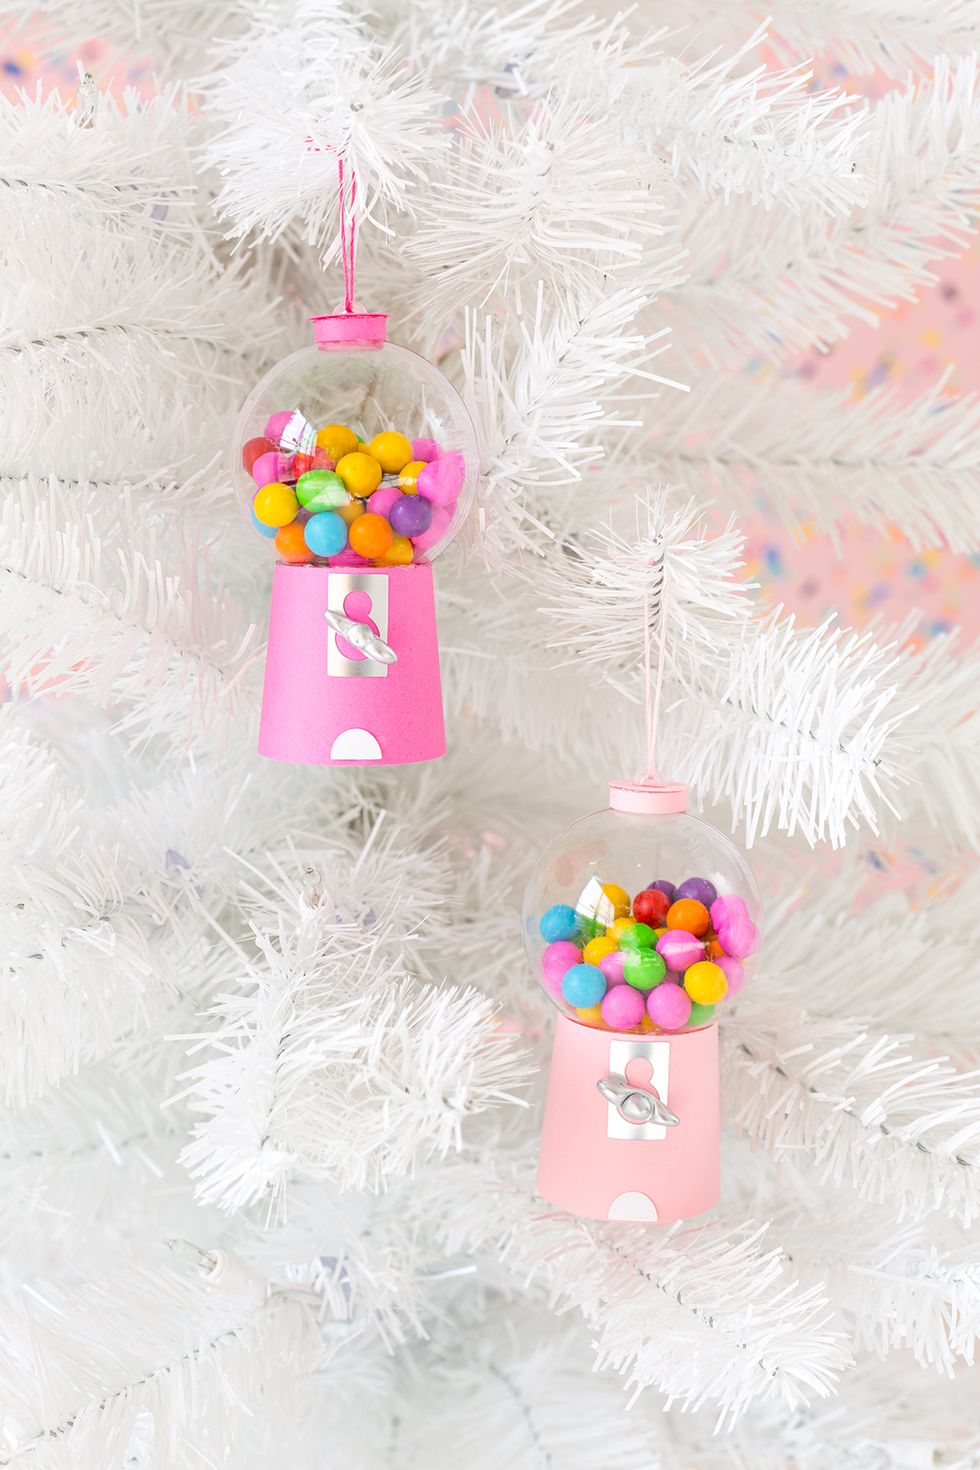 Mini Red Solo Cup Gumball Machine Ornament - Crafty Morning